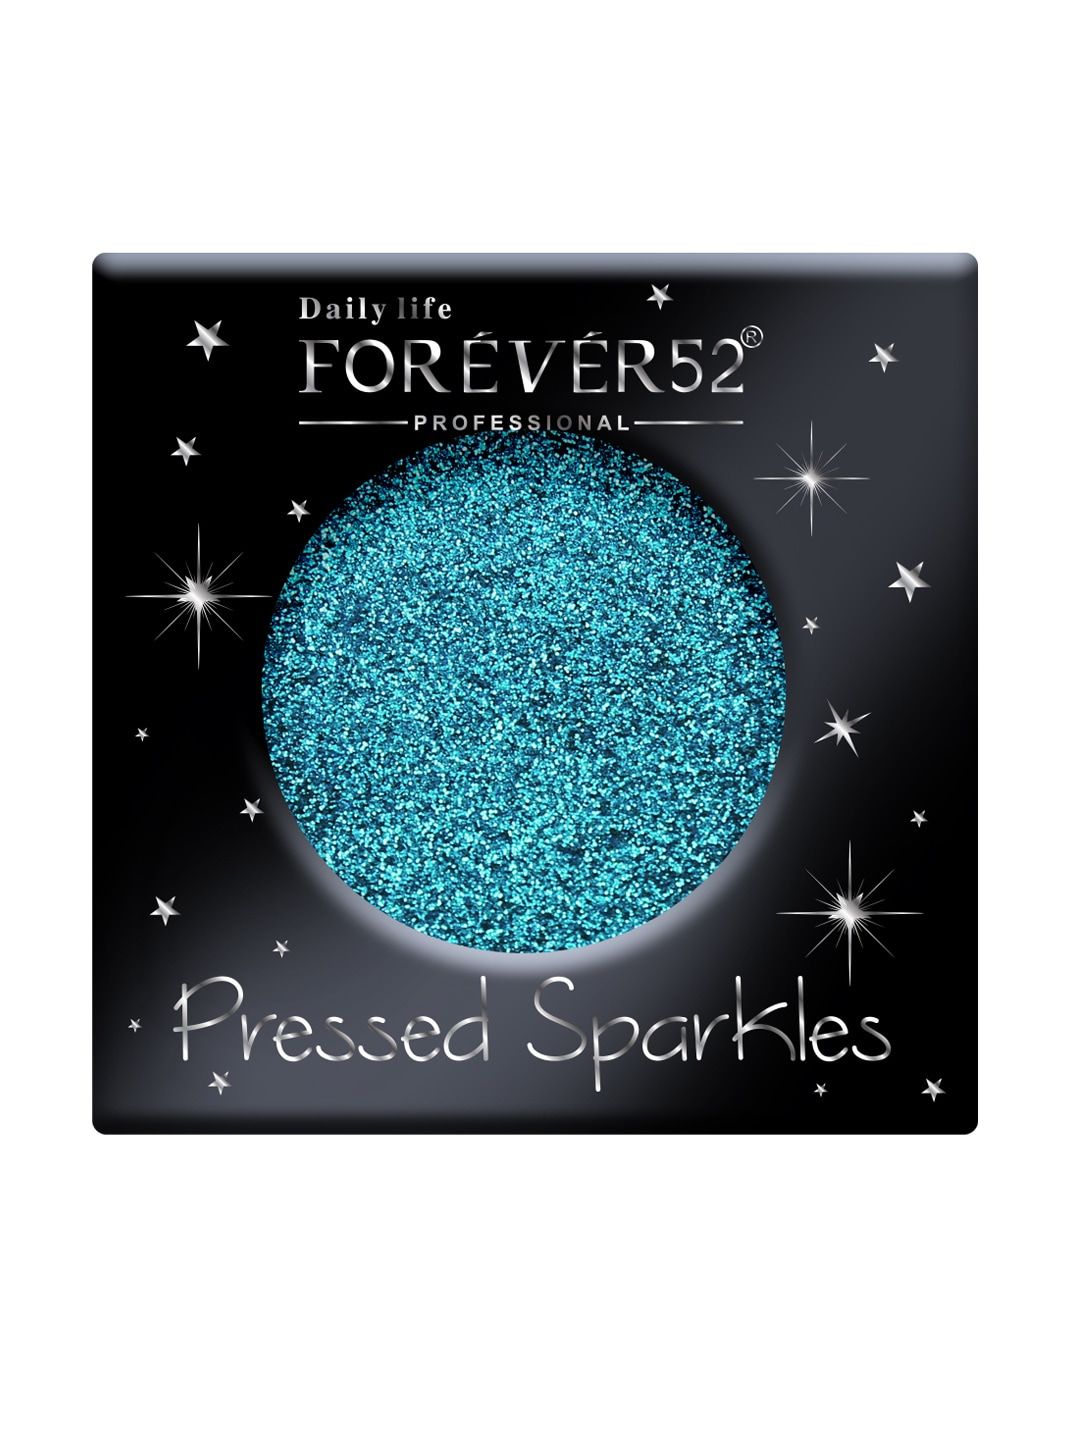 Daily Life Forever52 Pressed Sparkles Bombshell PS013 Eyeshadow 3g Price in India